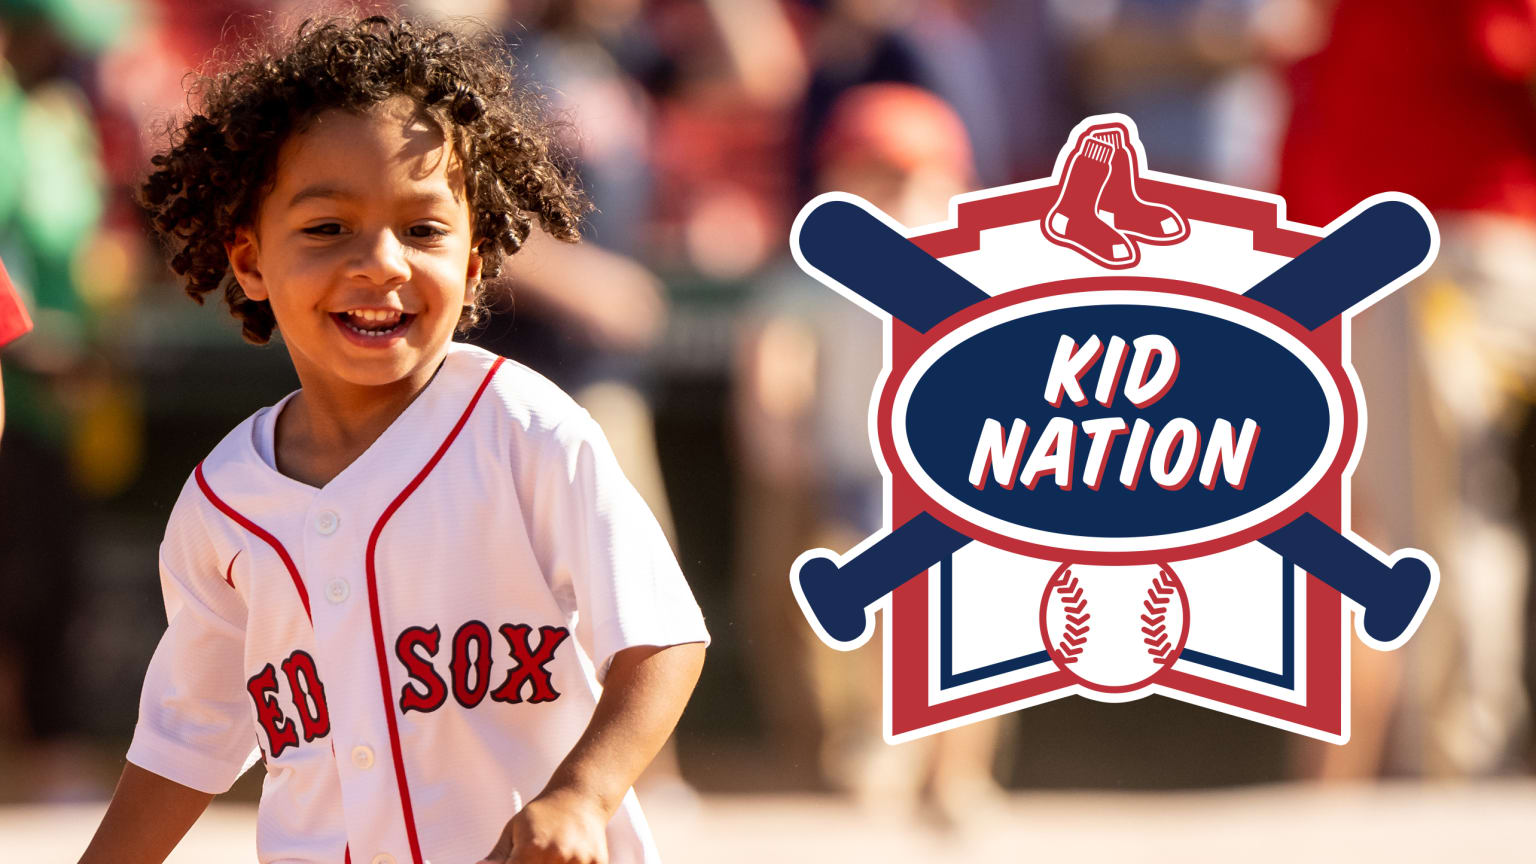 Boston Red Sox Kids Apparel, Red Sox Youth Jerseys, Kids Shirts, Clothing